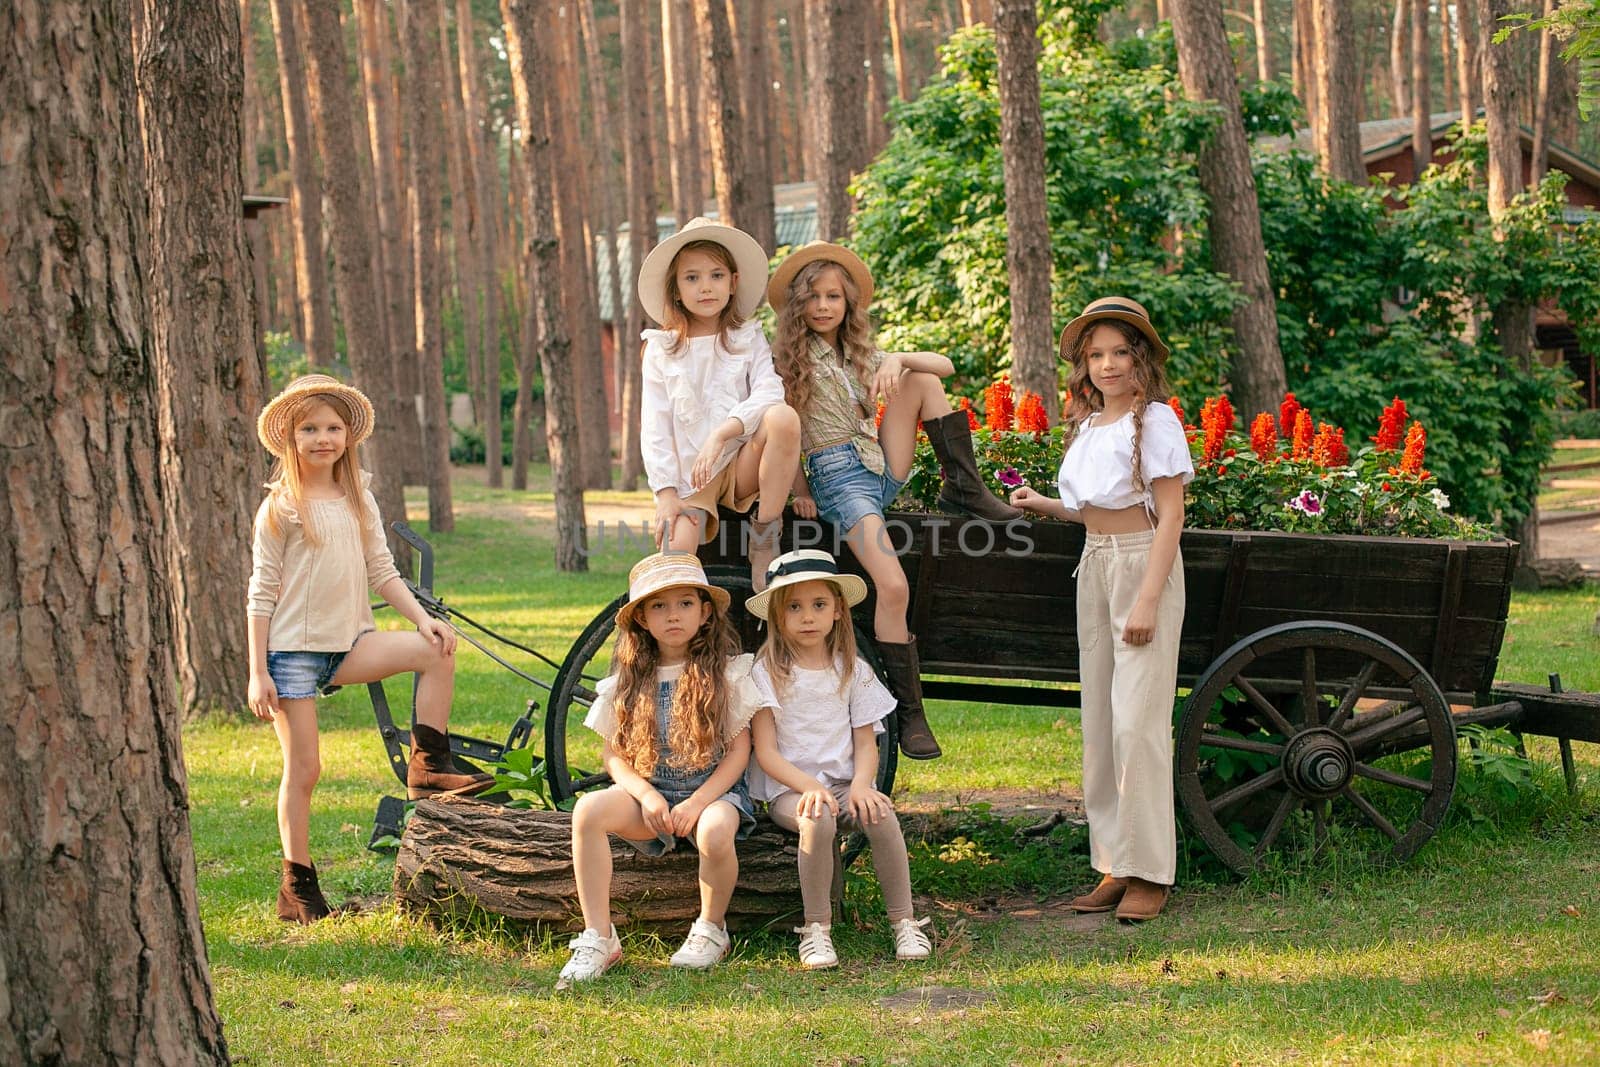 Cheerful preteen girls enjoying summer vacation in country estate, posing together outdoors near old rustic wooden cart used as designer flower bed with blooming red salvia